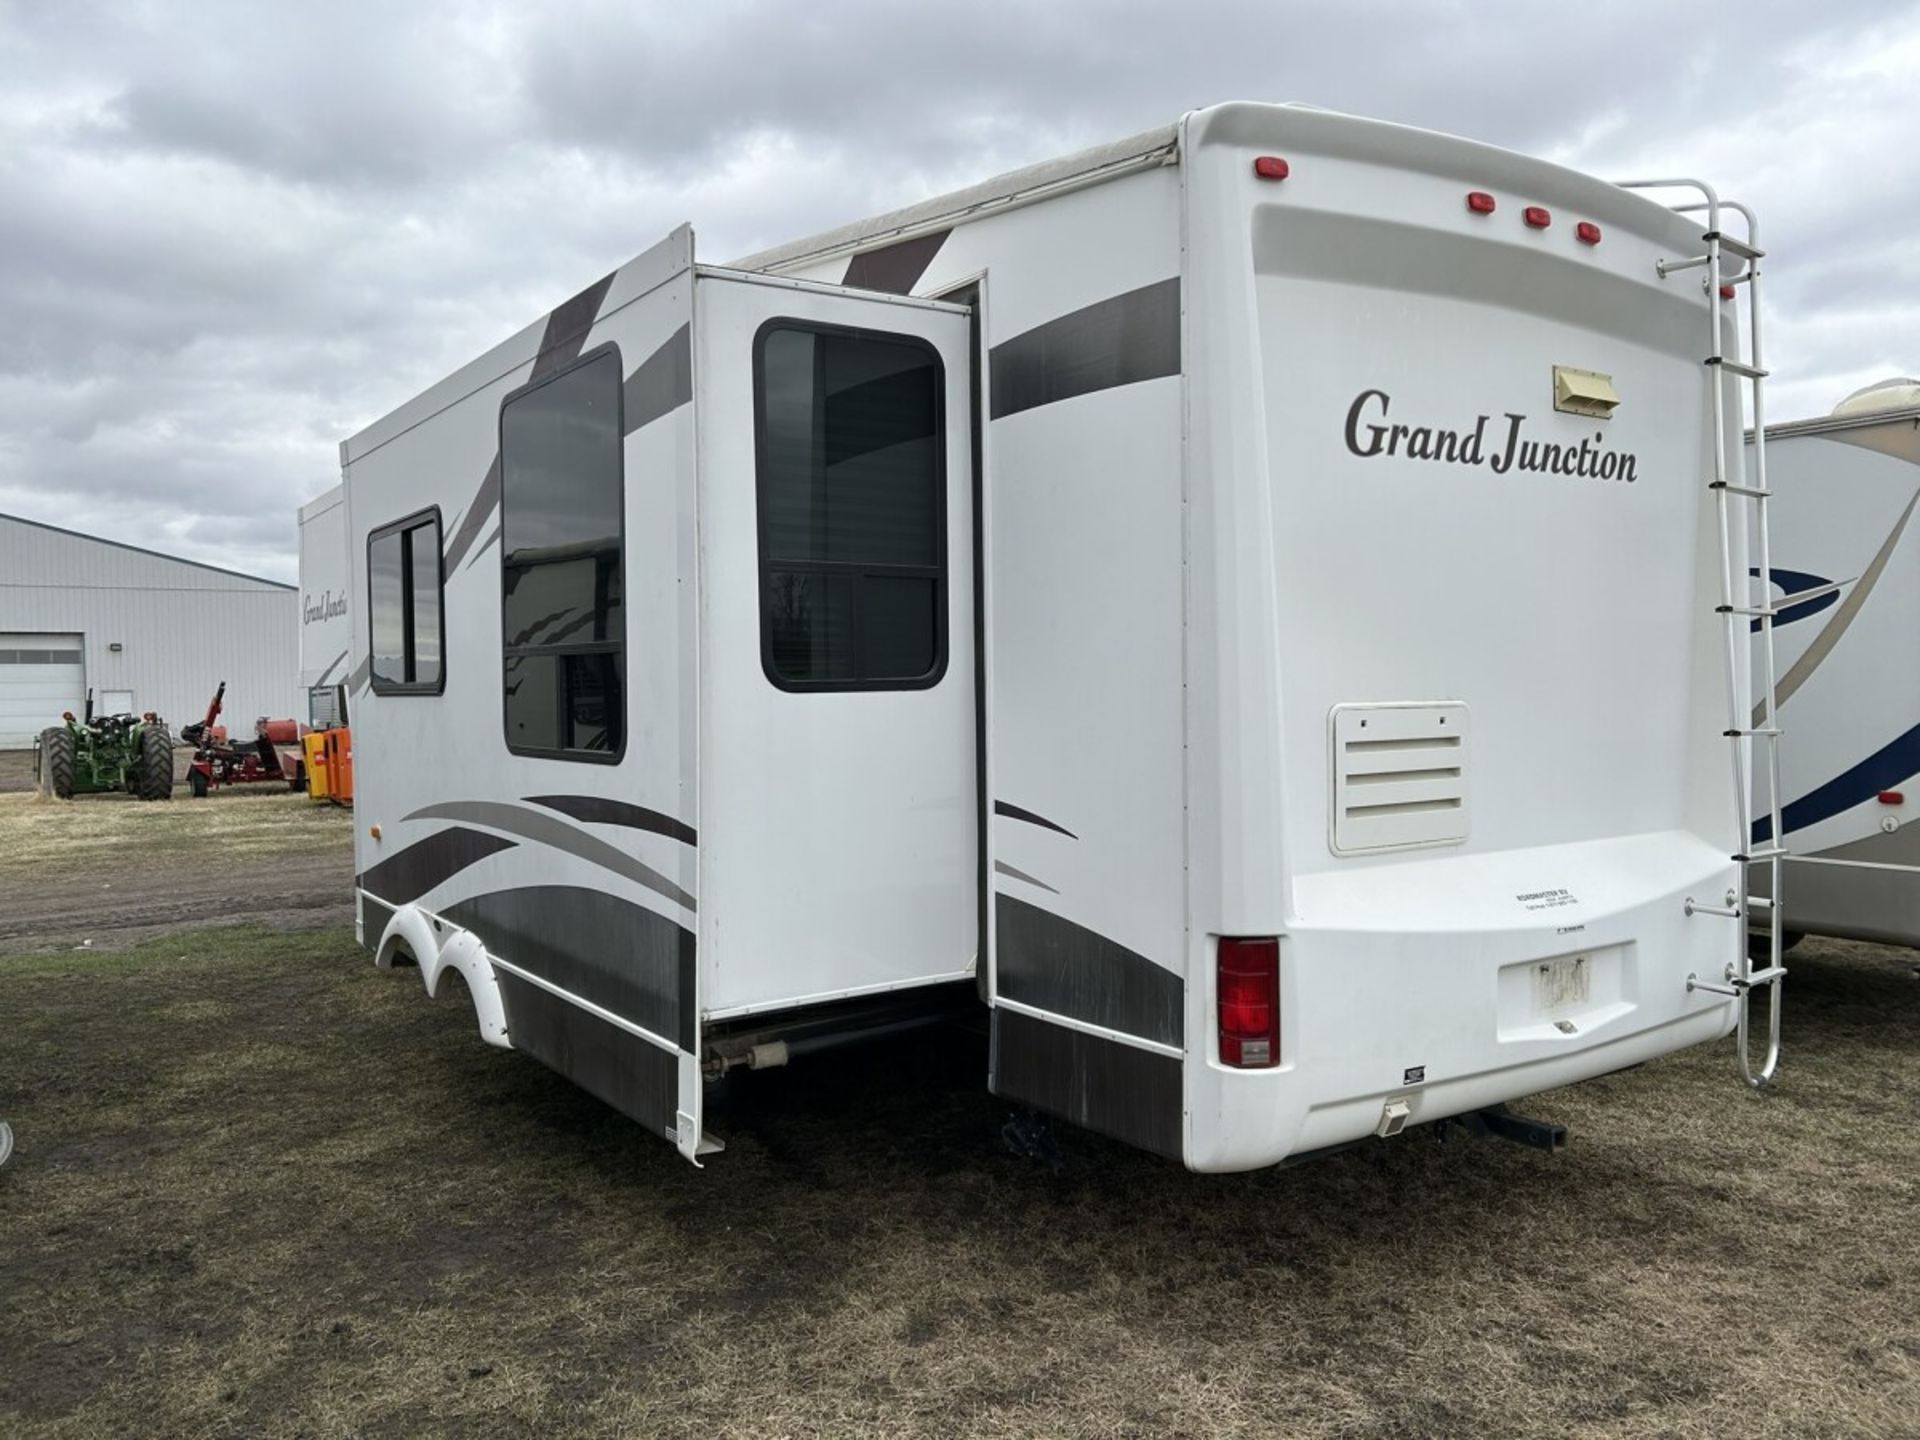 2007 GRAND JUNCTION 29DRK BY DUTCHMEN - DOUBLE SLIDE, AWNING, AC, REAR KITCHEN, FRONT QUEEN - Image 4 of 16